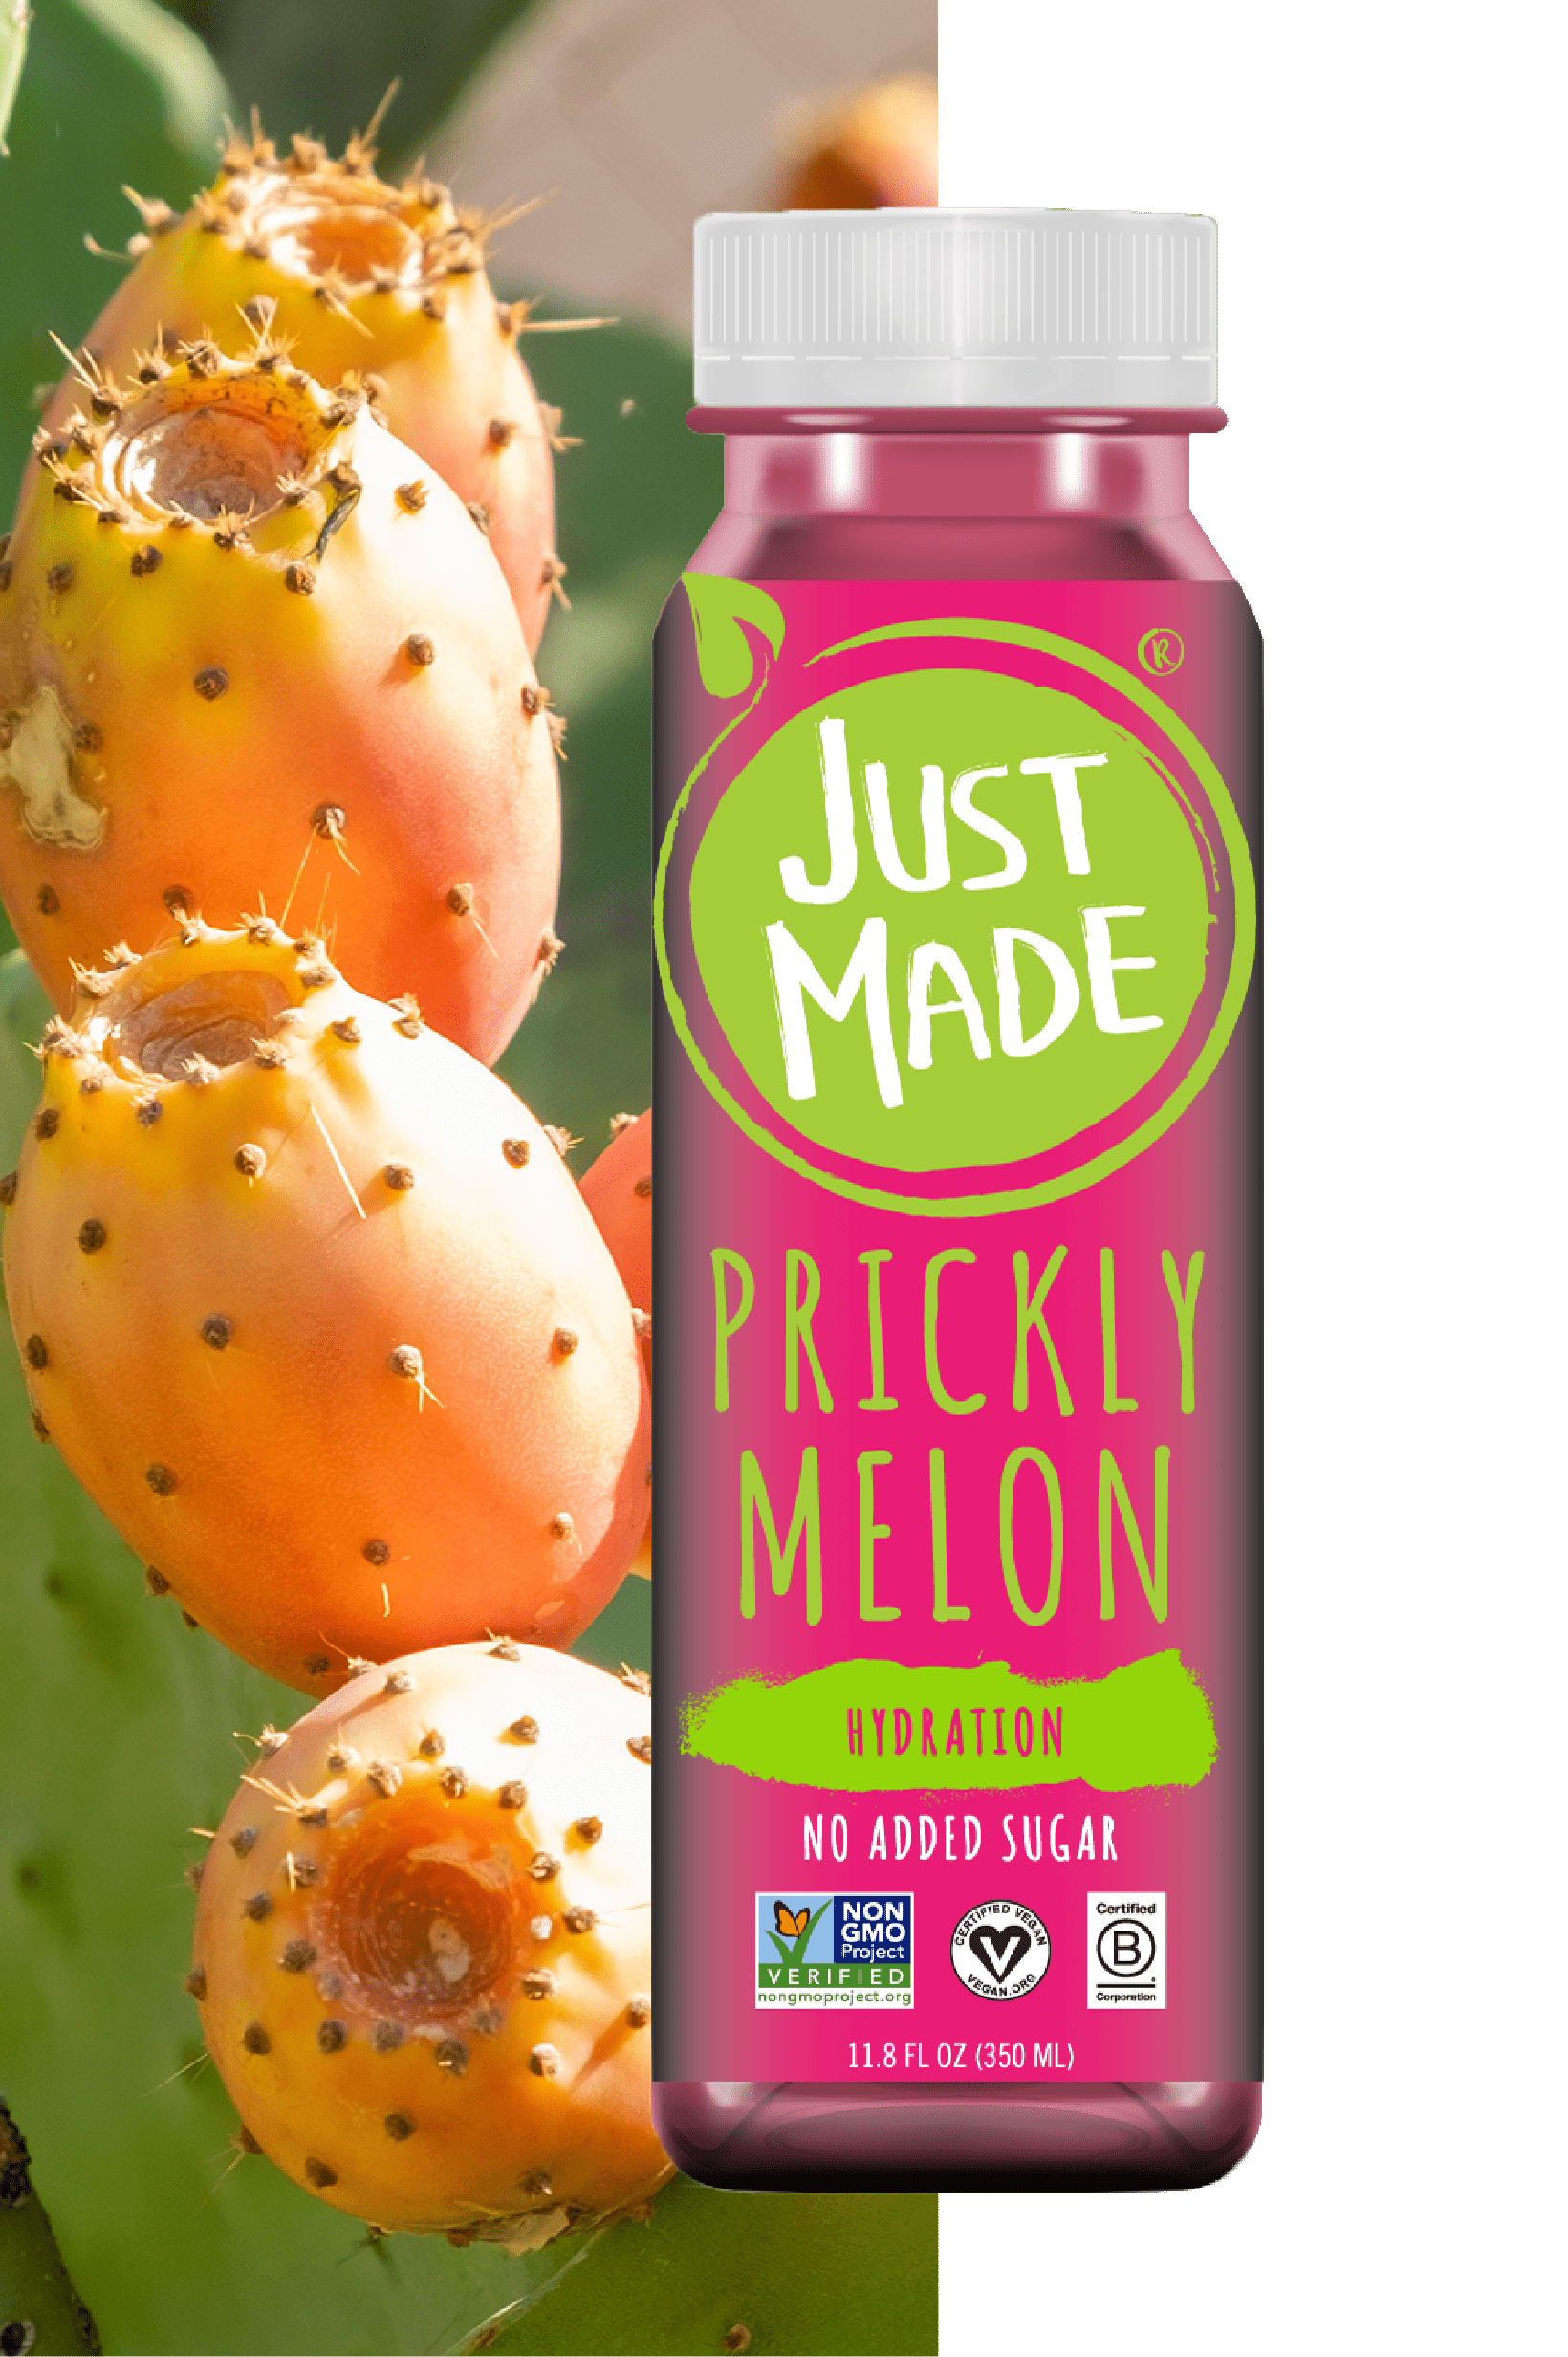 Prickly Melon product 150